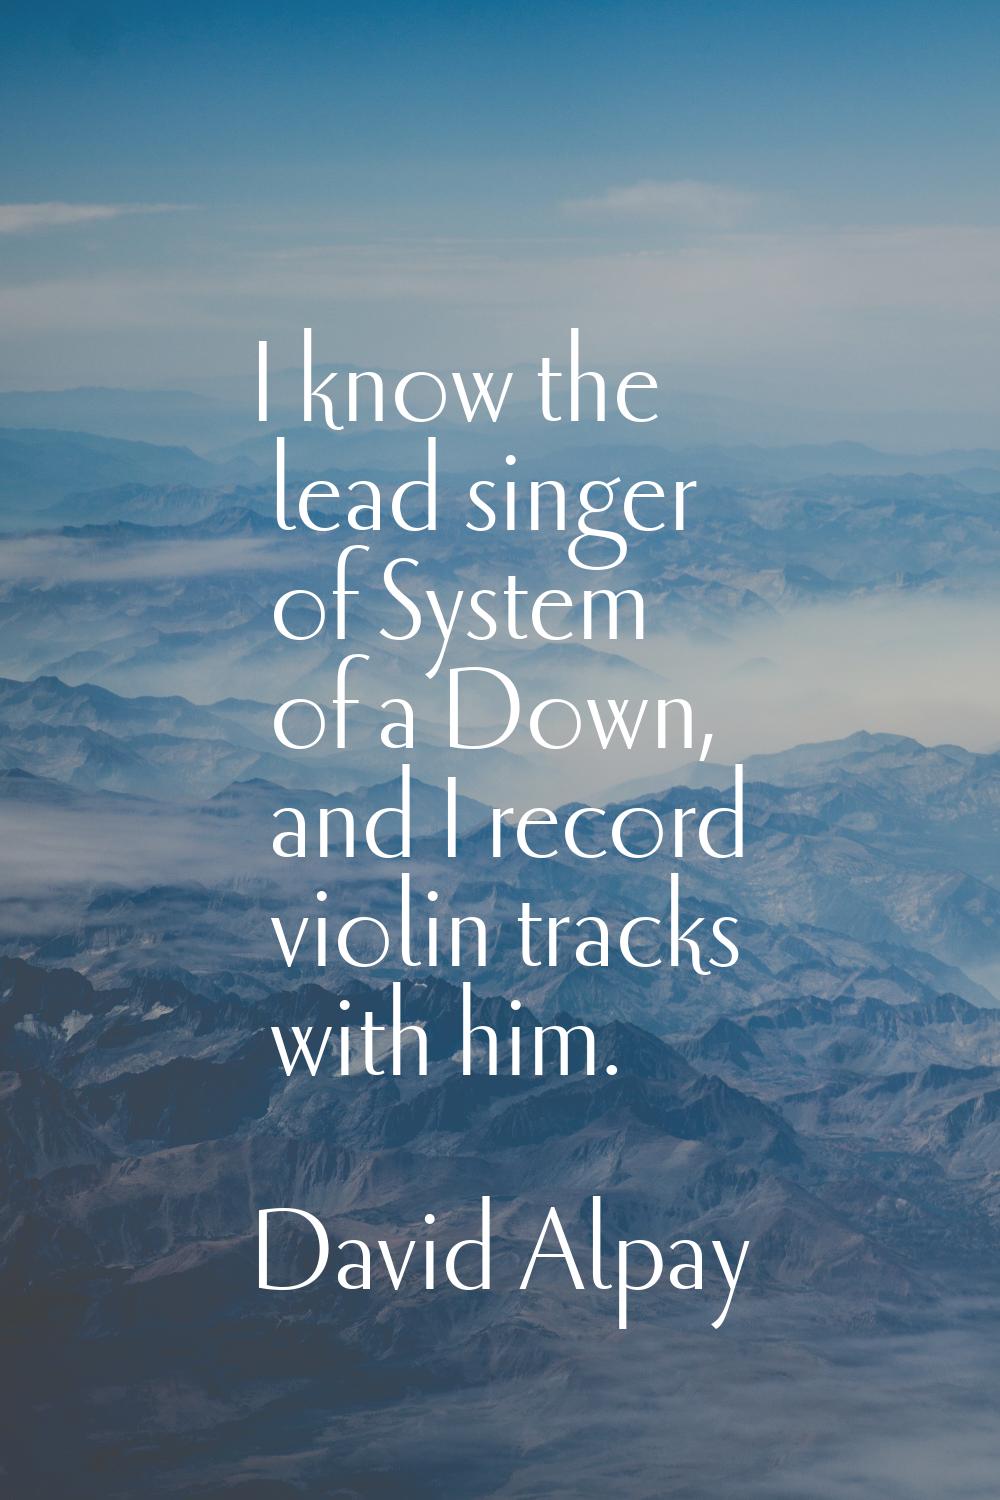 I know the lead singer of System of a Down, and I record violin tracks with him.